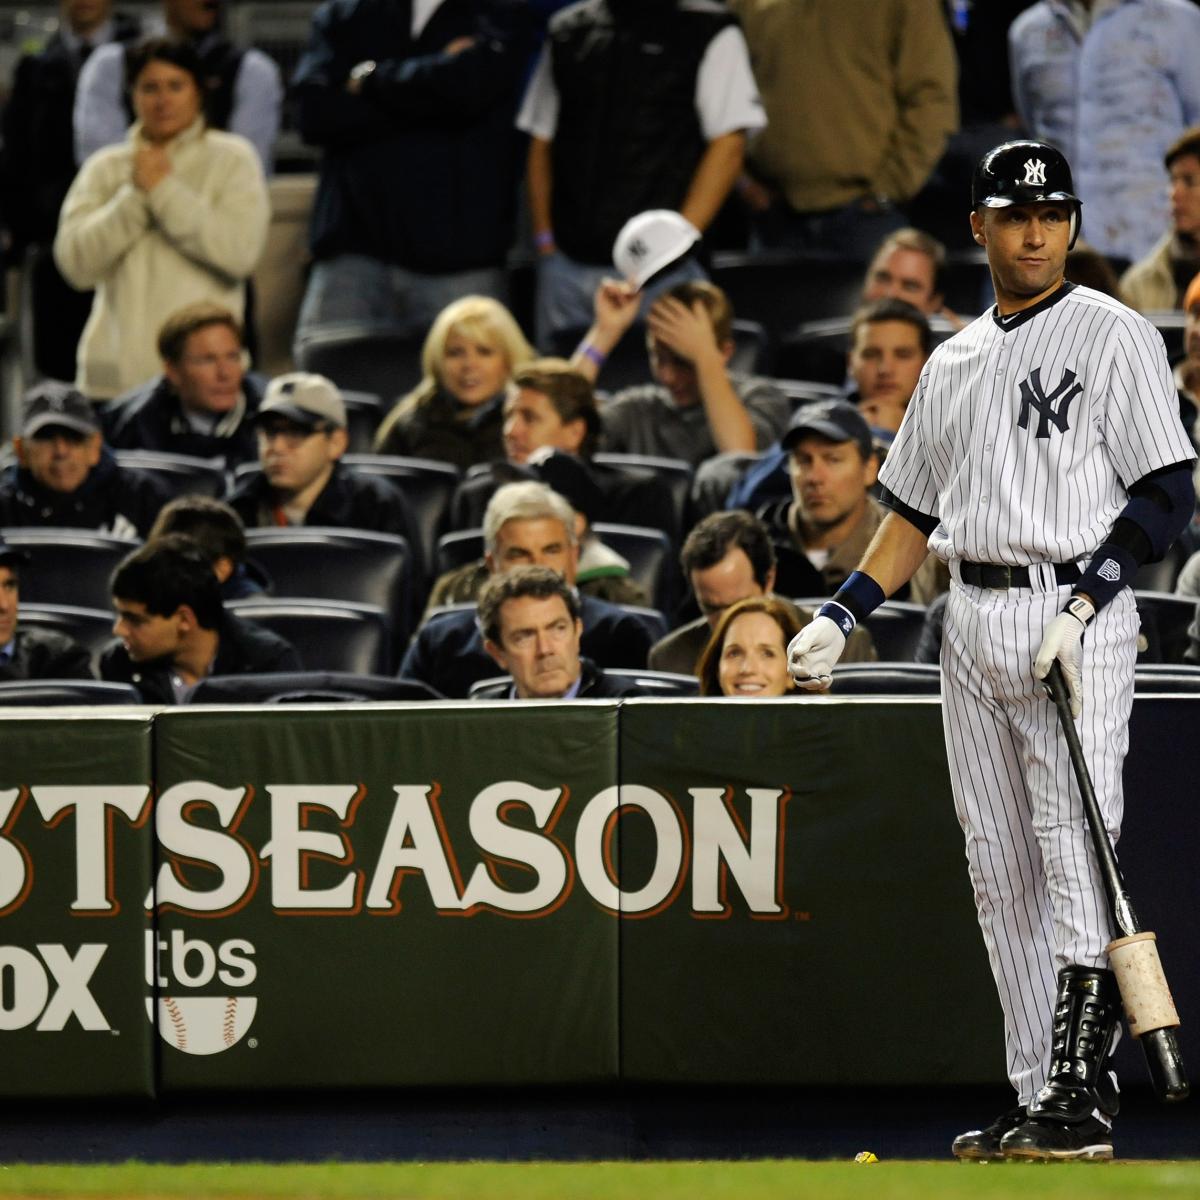 Tigers vs. Yankees Full Series Breakdown and Analysis for ALCS Matchup